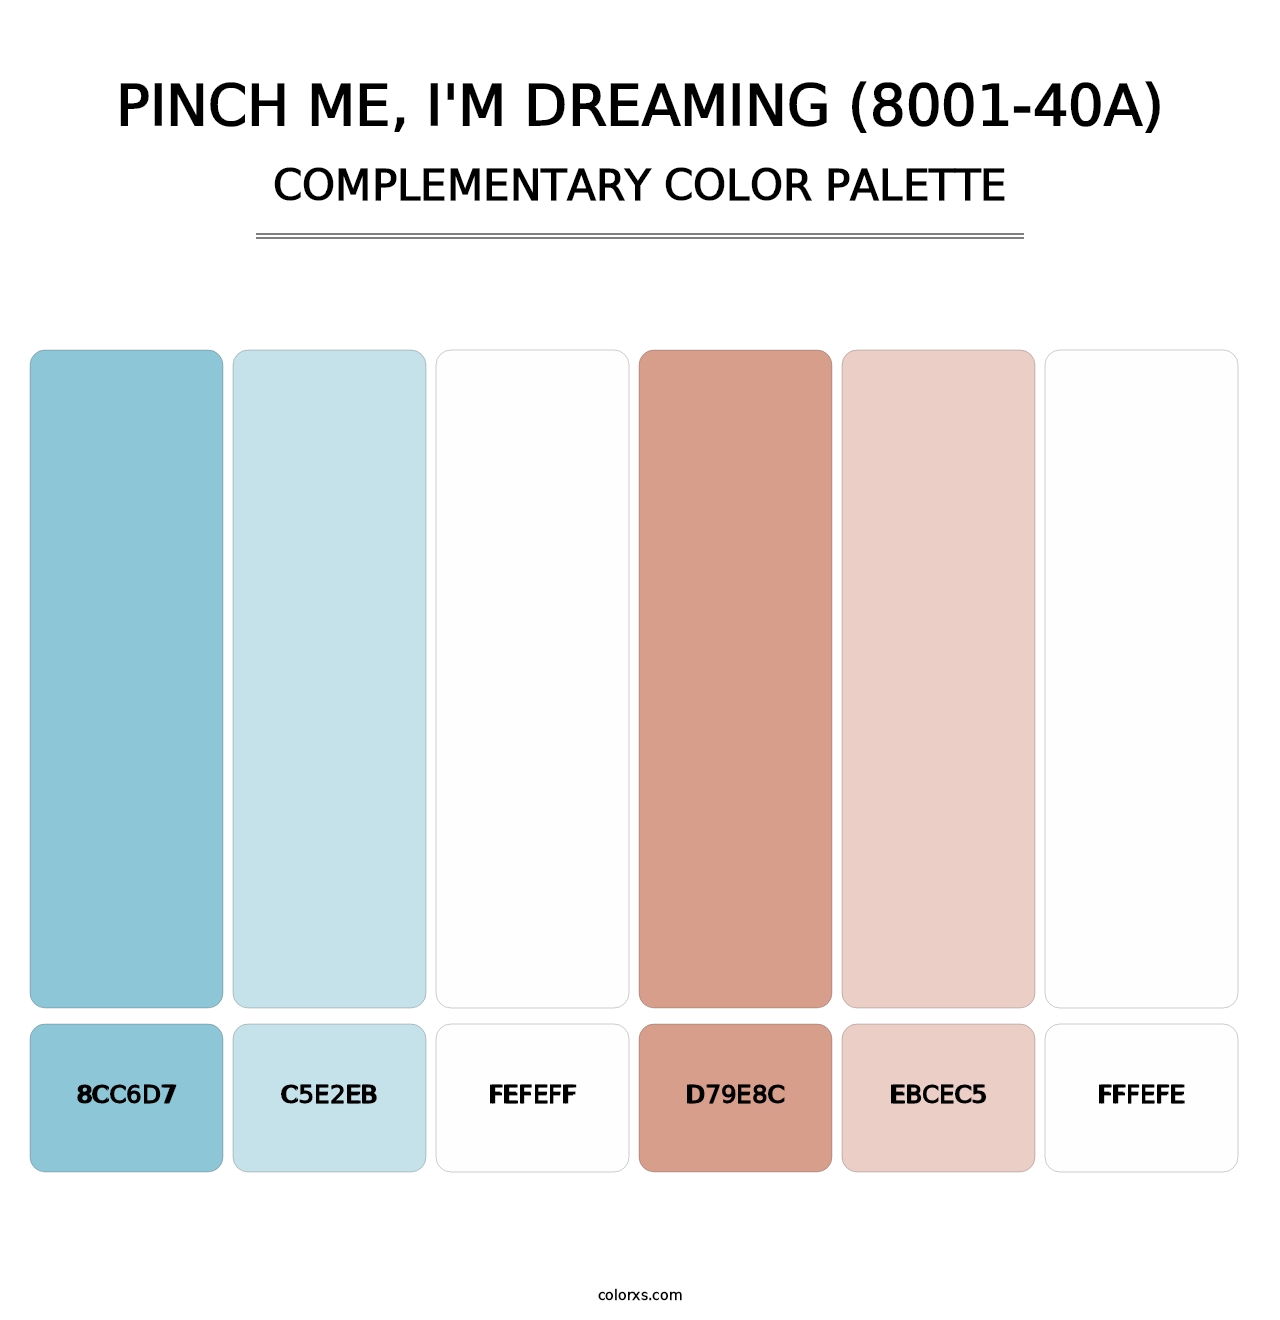 Pinch Me, I'm Dreaming (8001-40A) - Complementary Color Palette